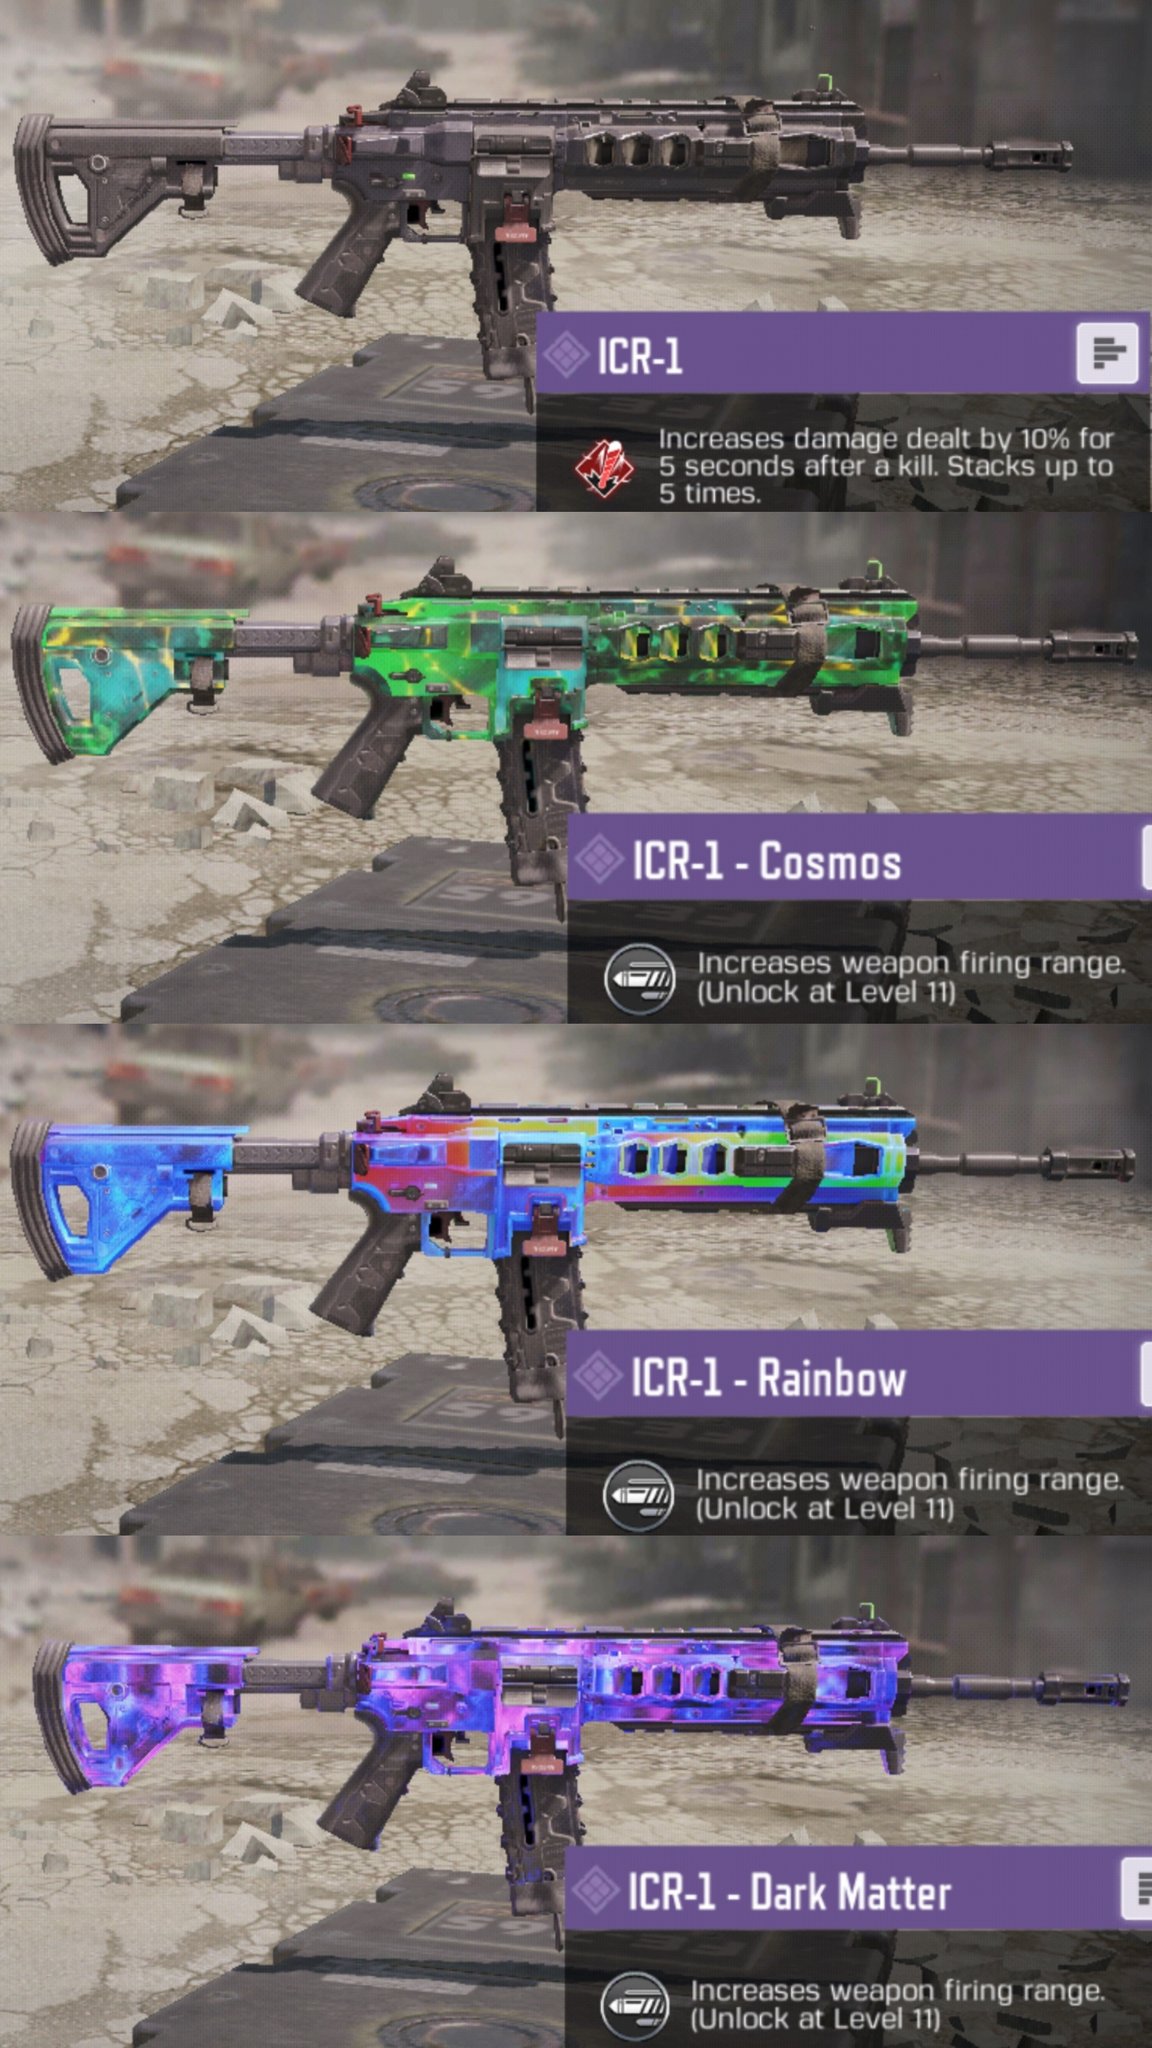 Call Of Duty Mobile Leaks News All Icr Skins Source Goodccc T Co 43zf278ykh Twitter